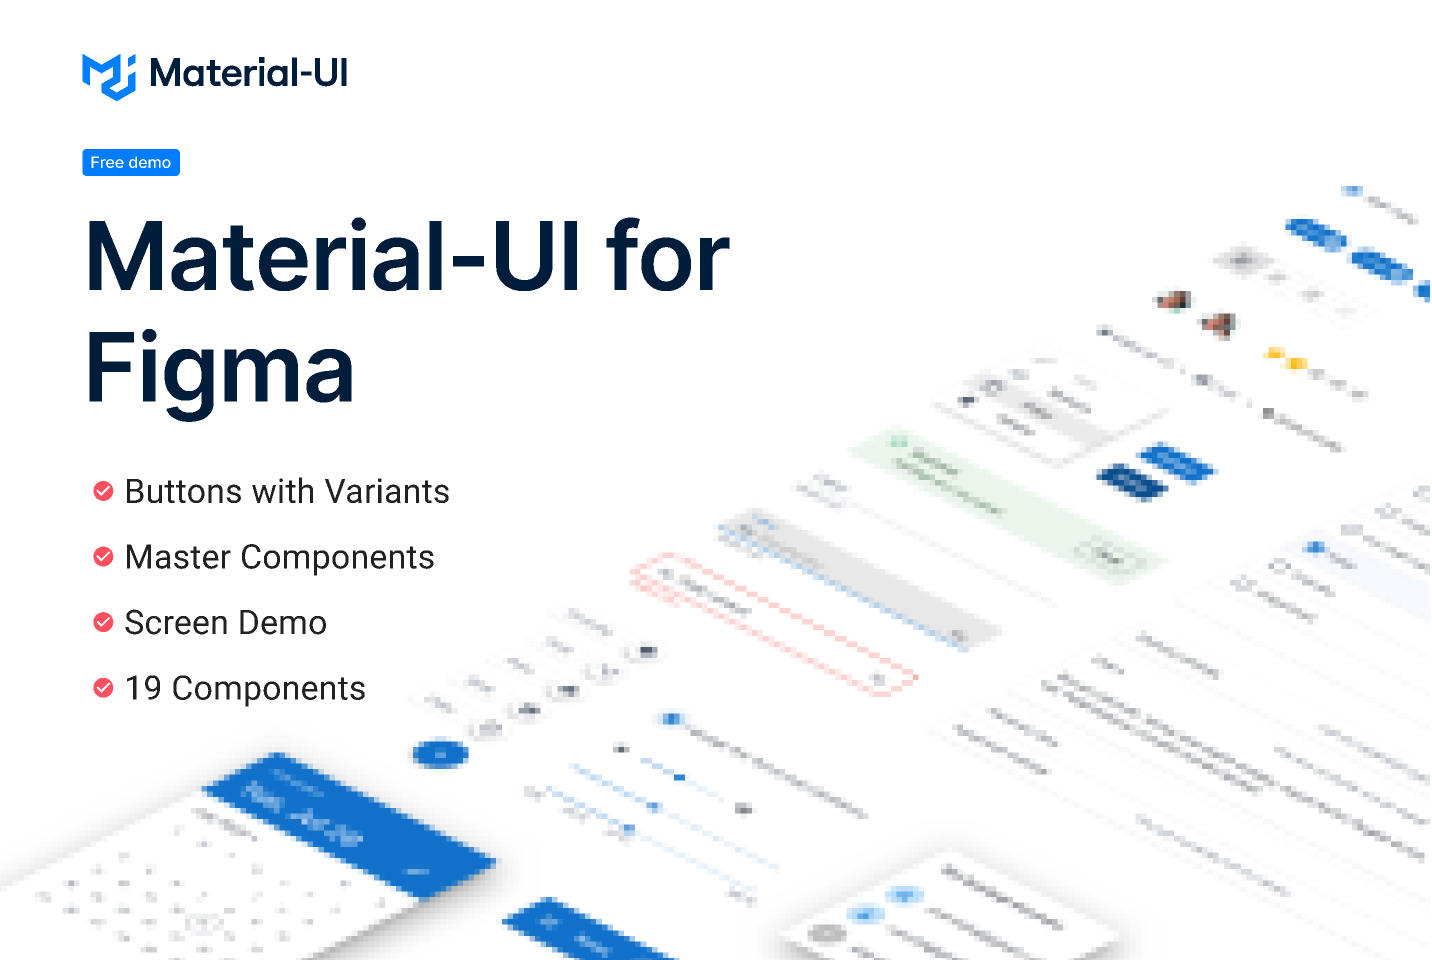 Figma - Material-UI for Figma v4.13.0 (Free Demo) | A free demo of a large UI kit with over 600 handcrafted Material-UI symbols for Figma.

Click on ...